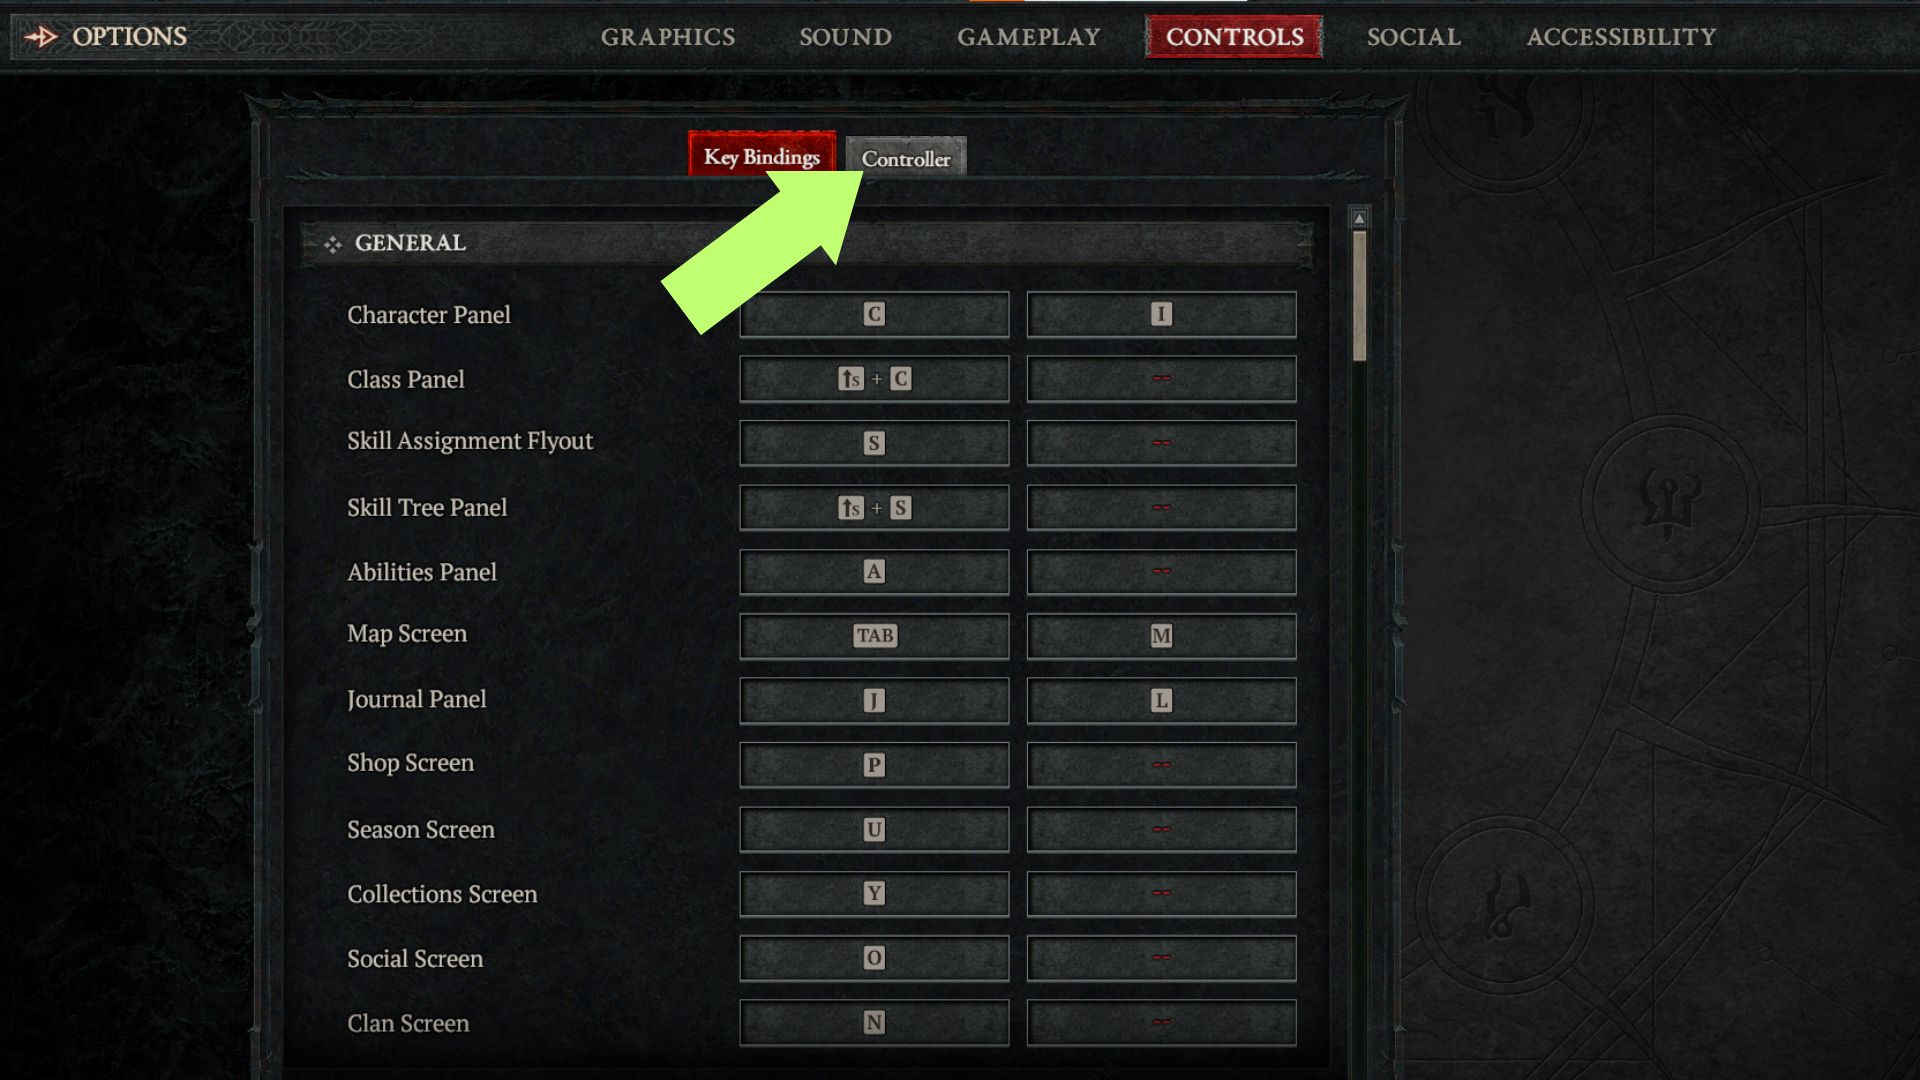 A screenshot showing the Controller section of the Controls menu
